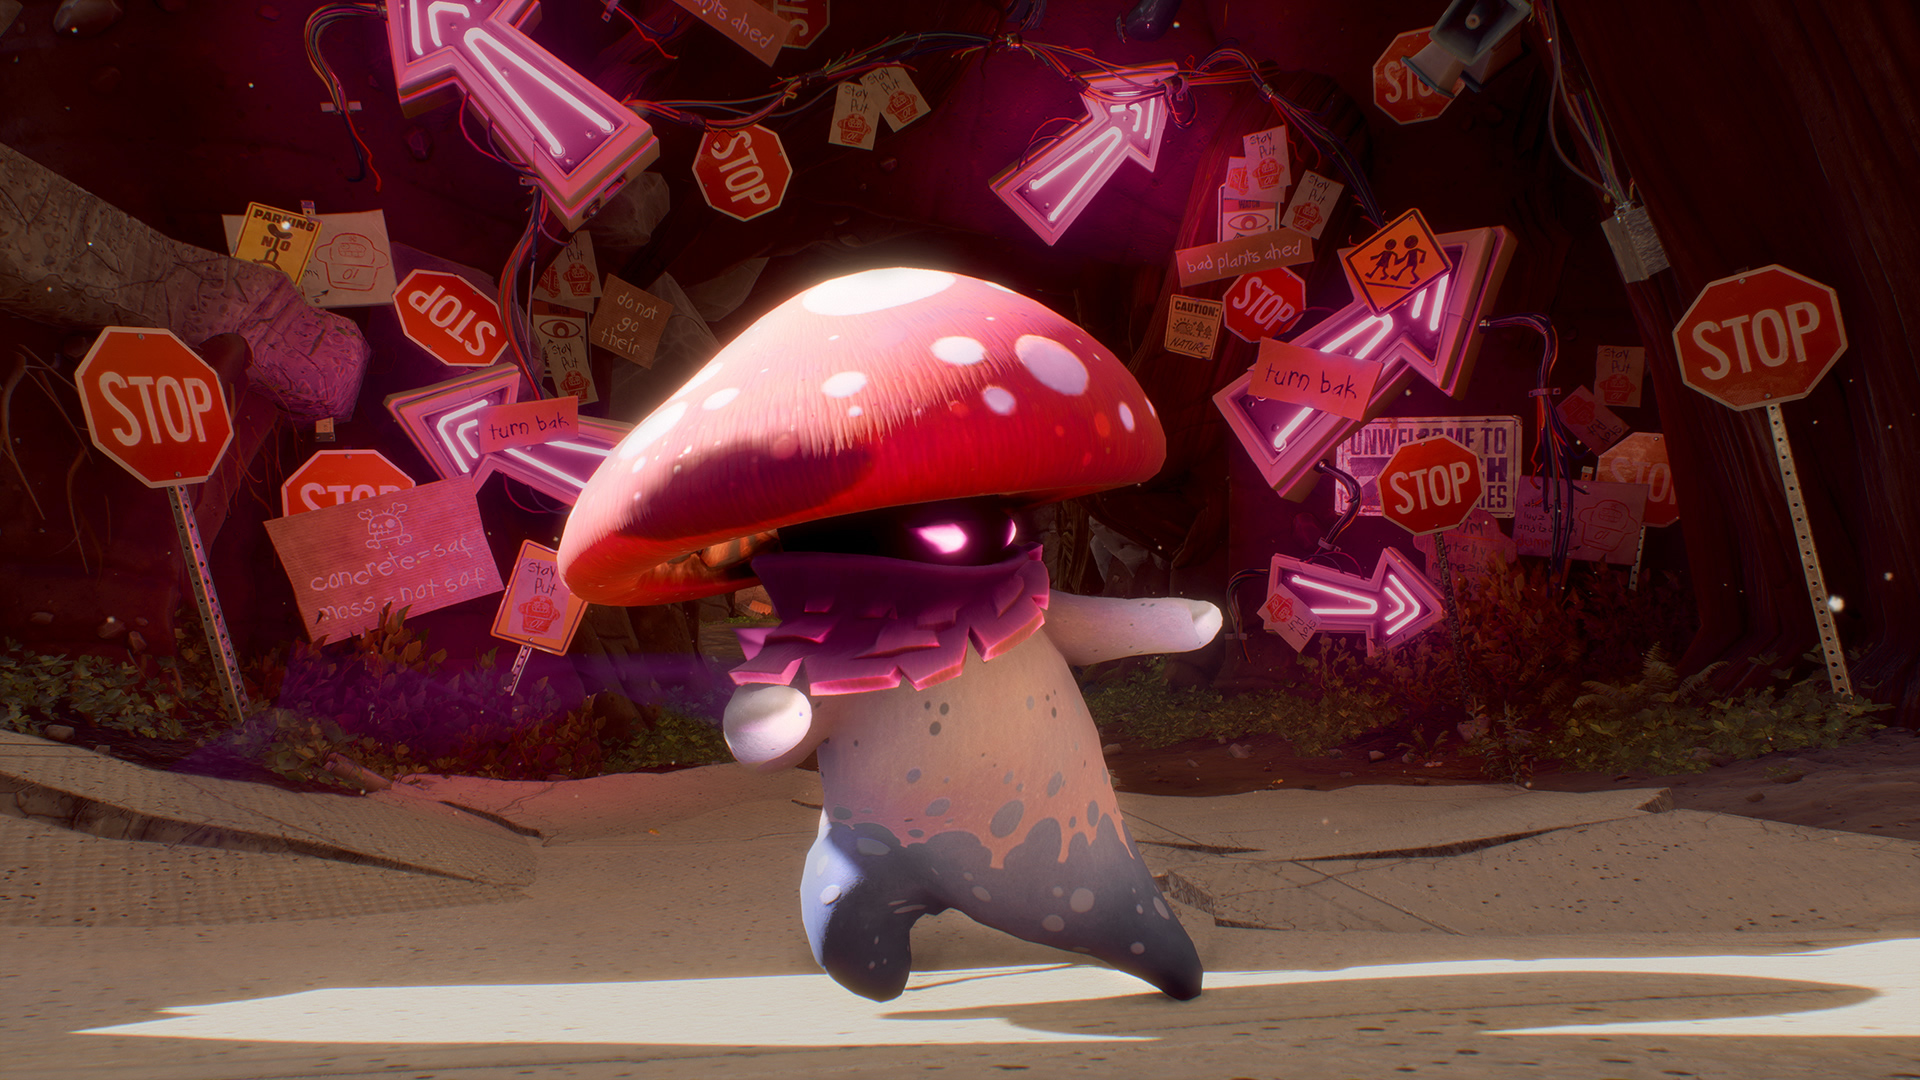 Plants Vs Zombies Red Amanita Muscaria Signs Neon Sign Stop Sign Video Game Art Mushroom Red Eyes Vi 1920x1080